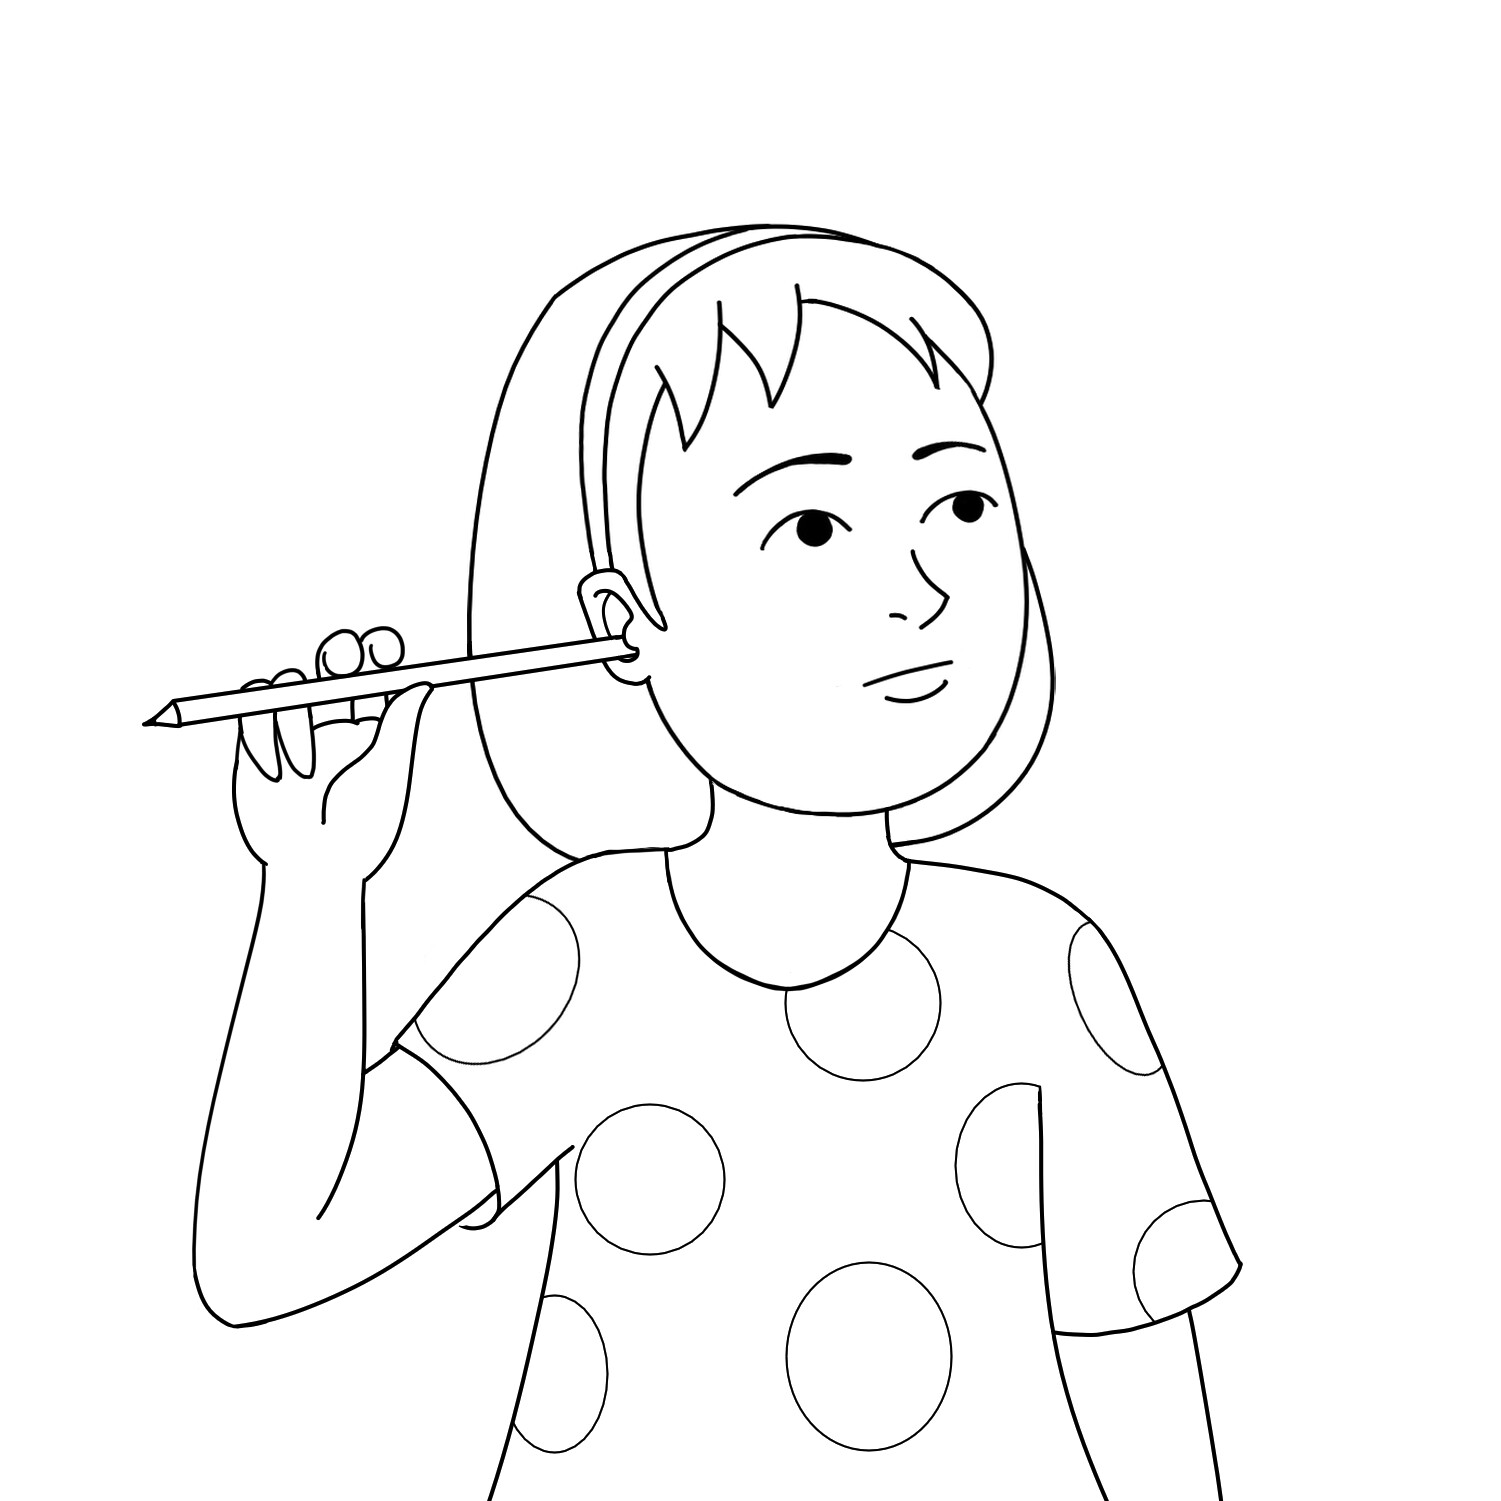 cleaning ears clipart